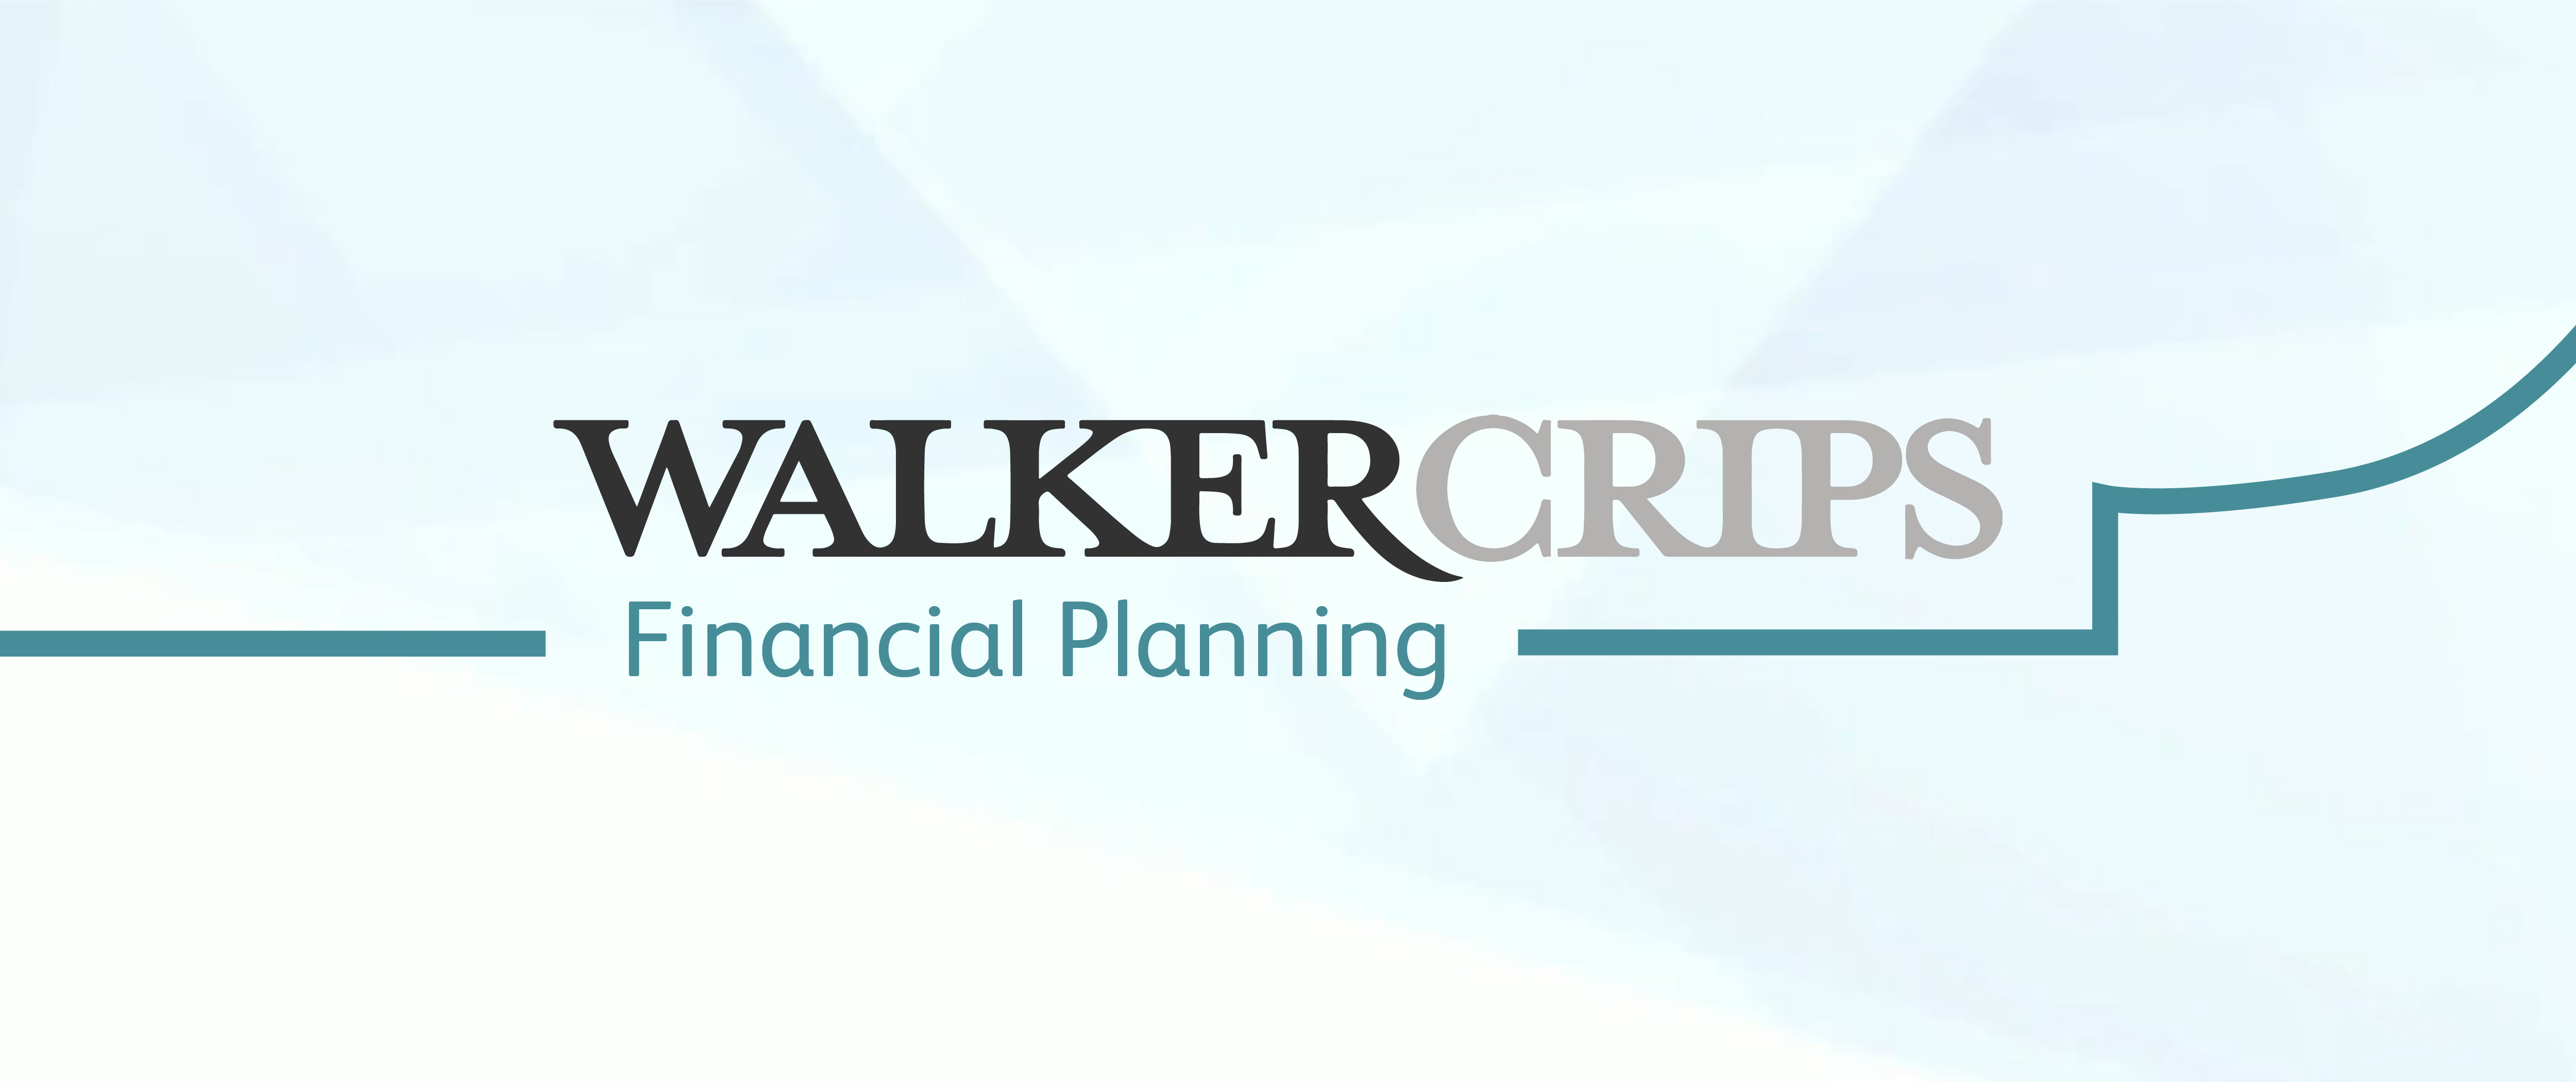 A new name for our financial planning service!